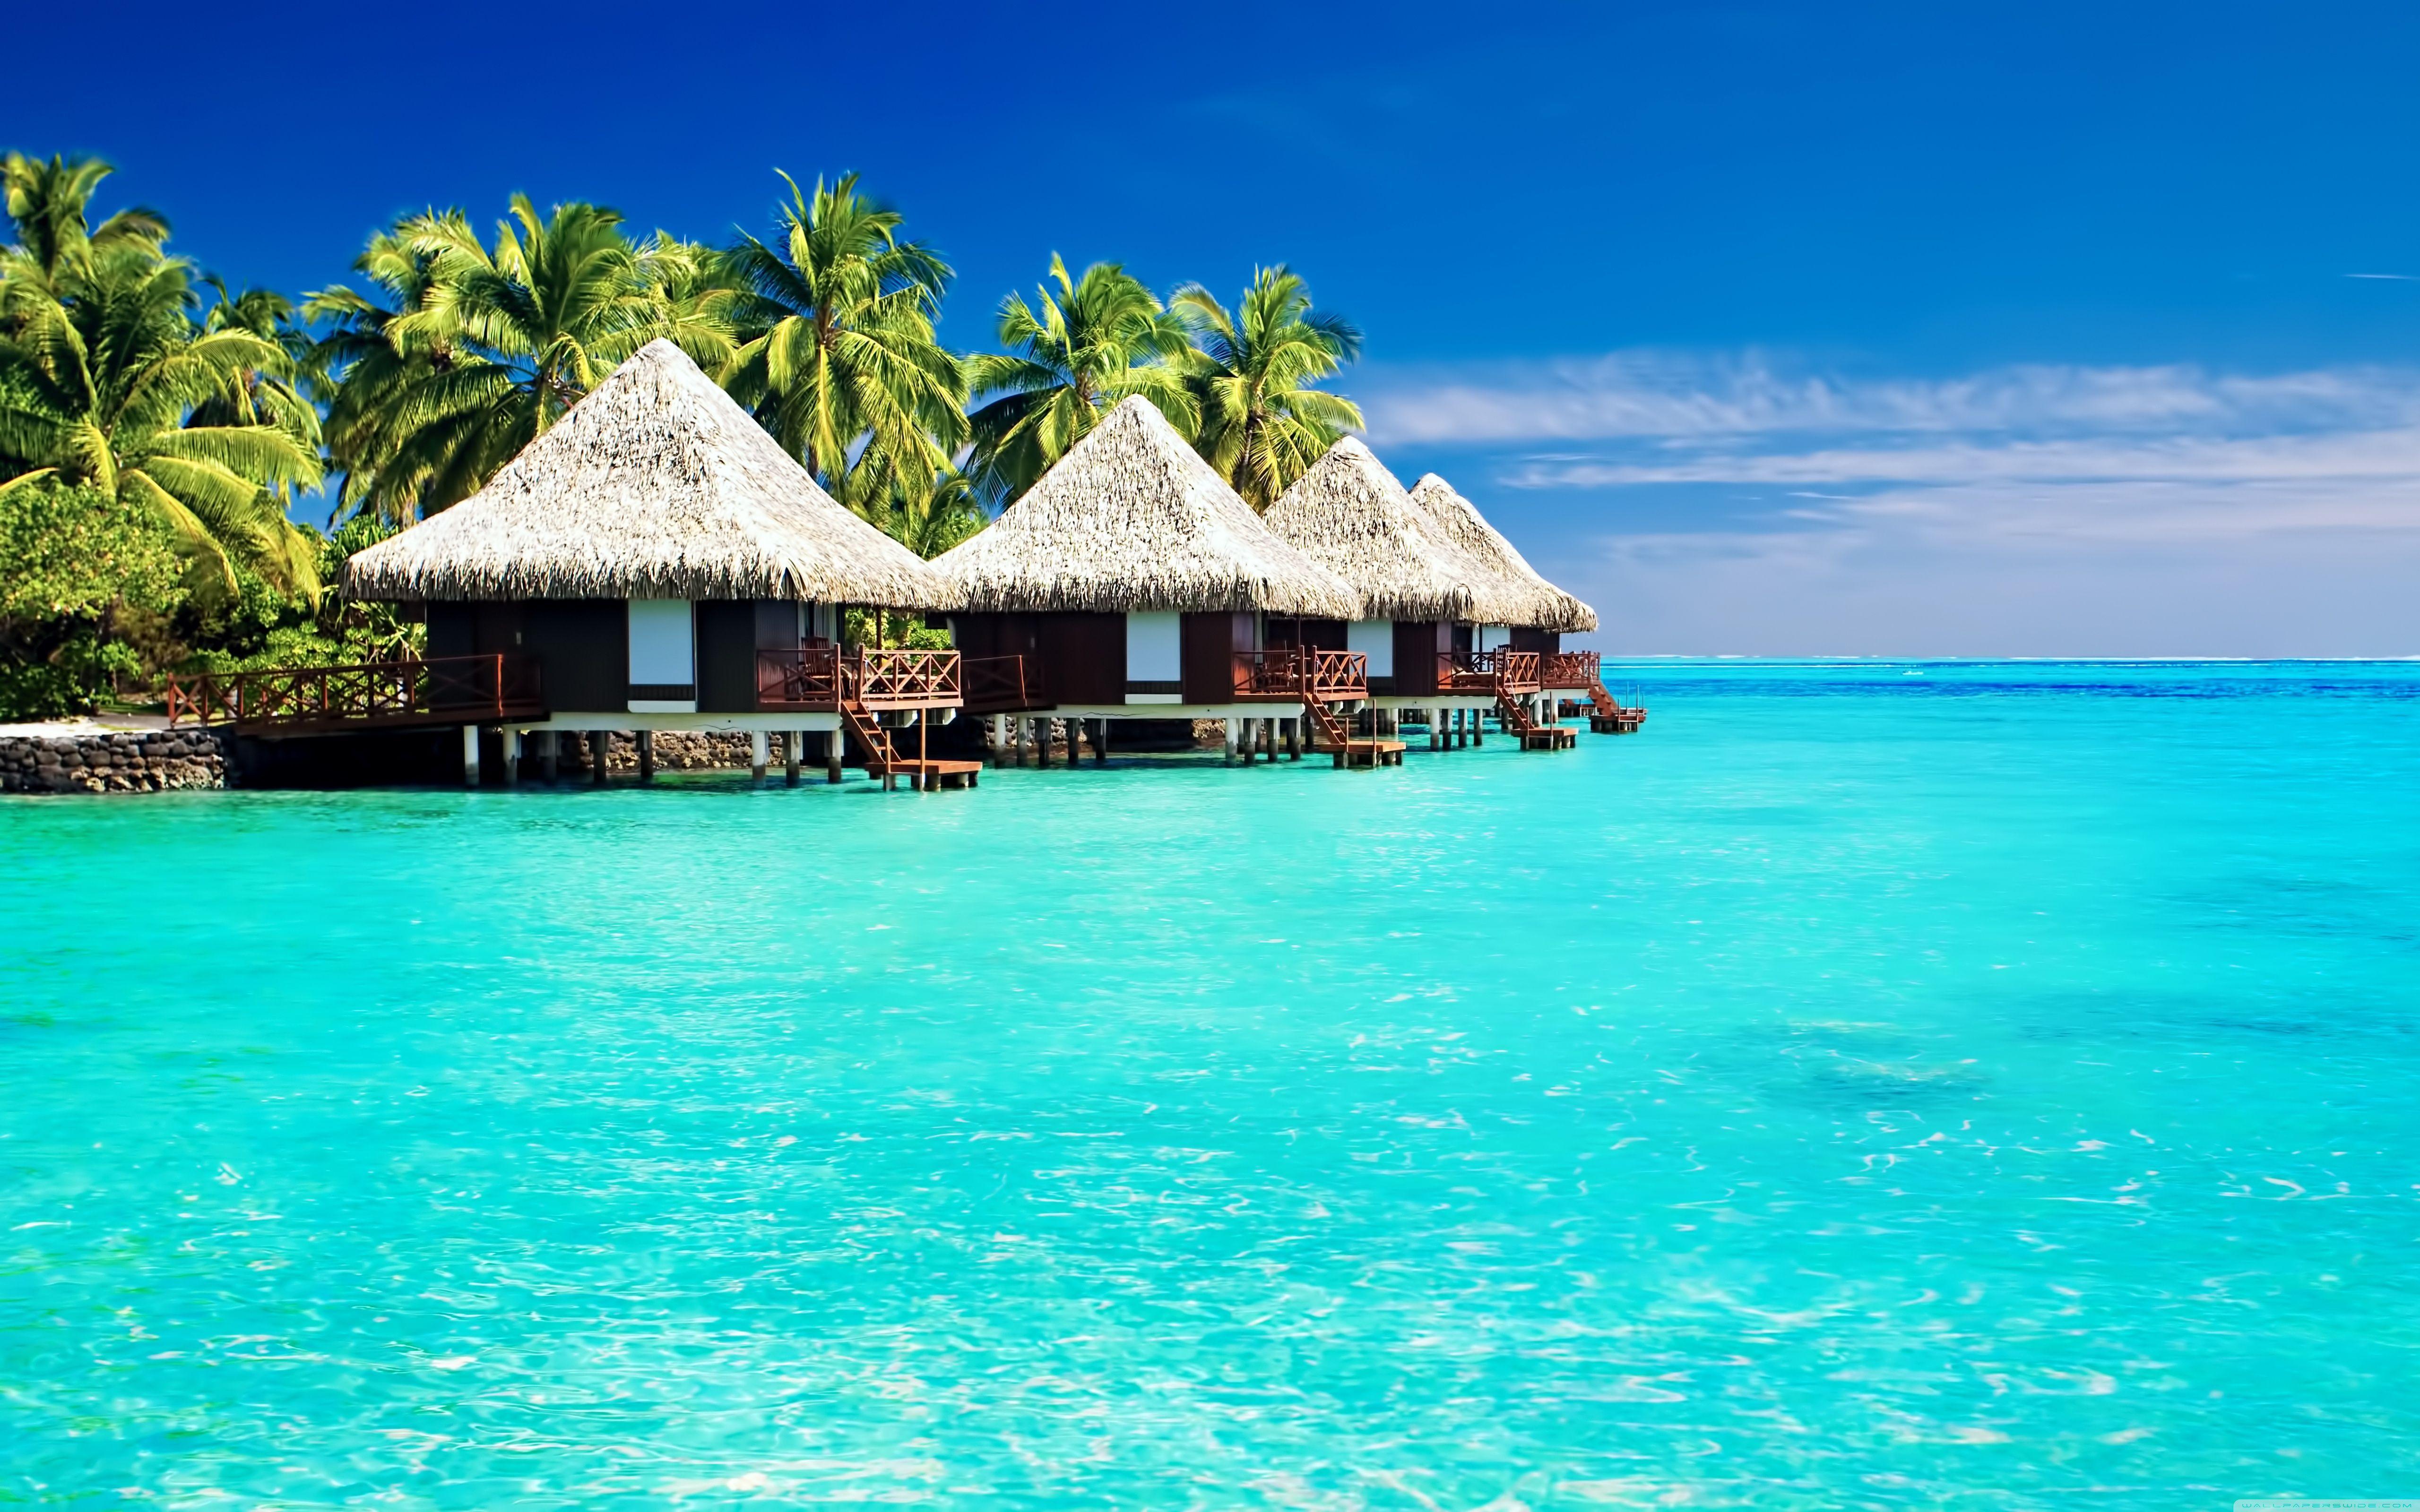 Escape to paradise with these Desktop backgrounds tropical scenery